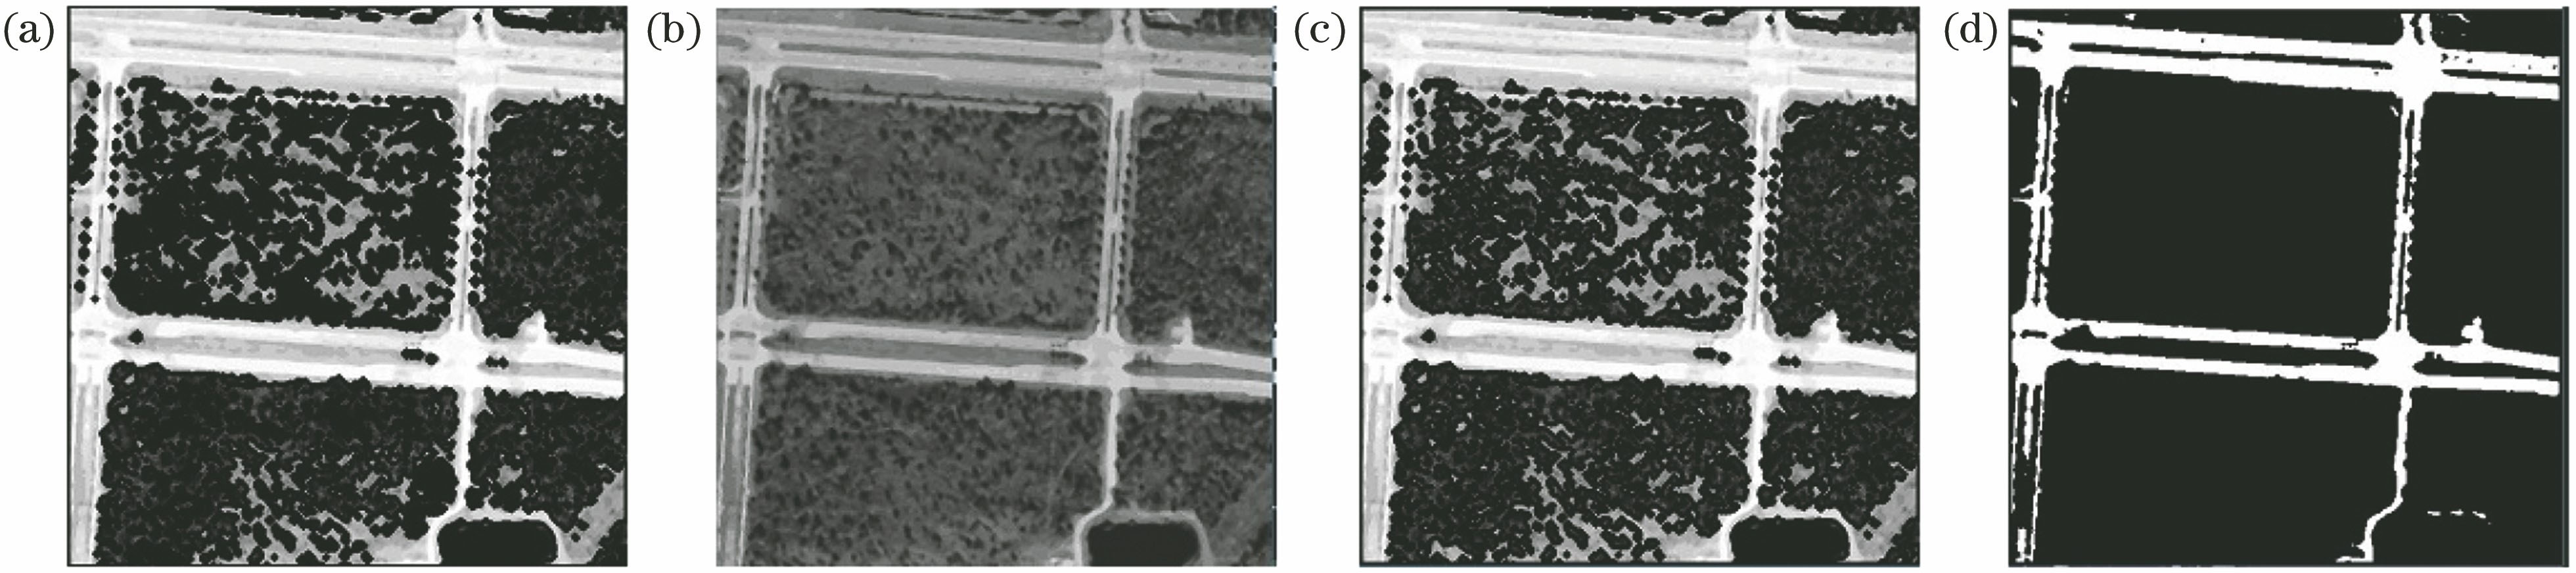 Road extraction process. (a) Image mathematical morphology processing result; (b) image EM clustering result; (c) image contour detection result; (d) road extraction result